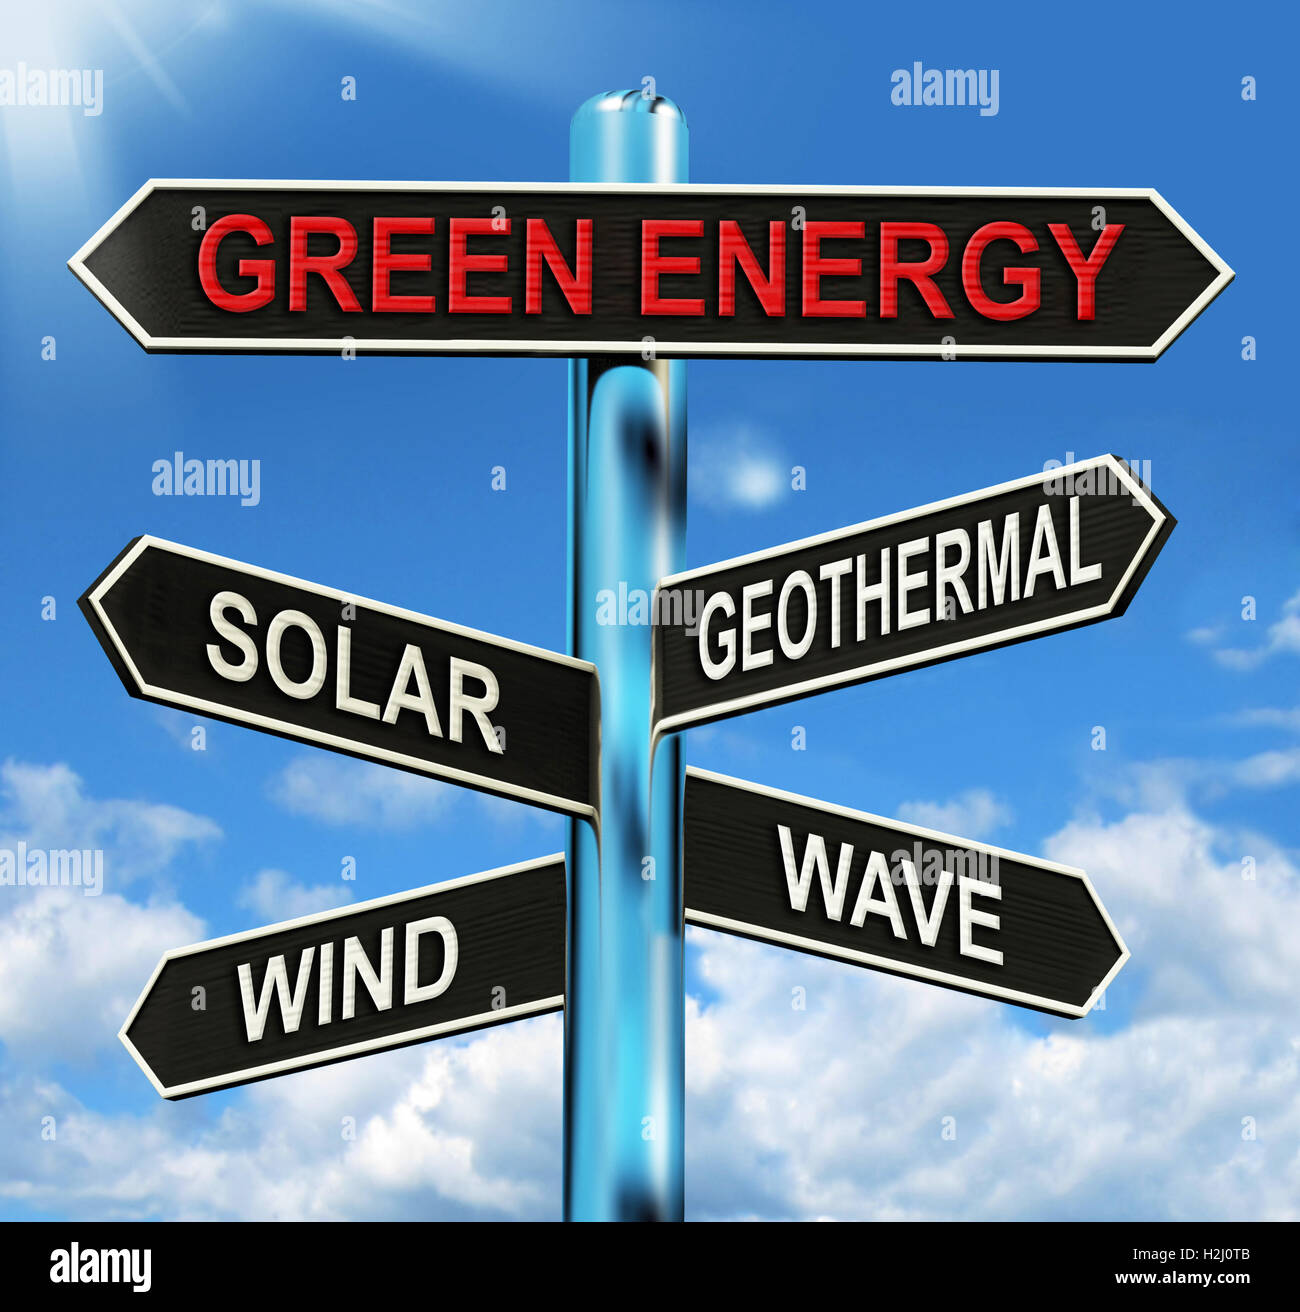 Green Energy Signpost Means Solar Wind Geothermal And Wave Stock Photo